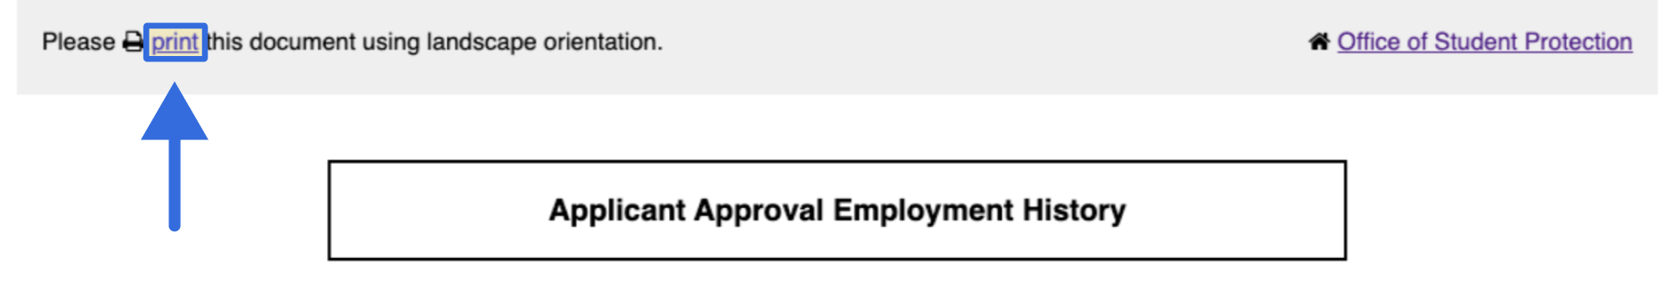 Ch6.Step2.Applicant Approval Employment History Print